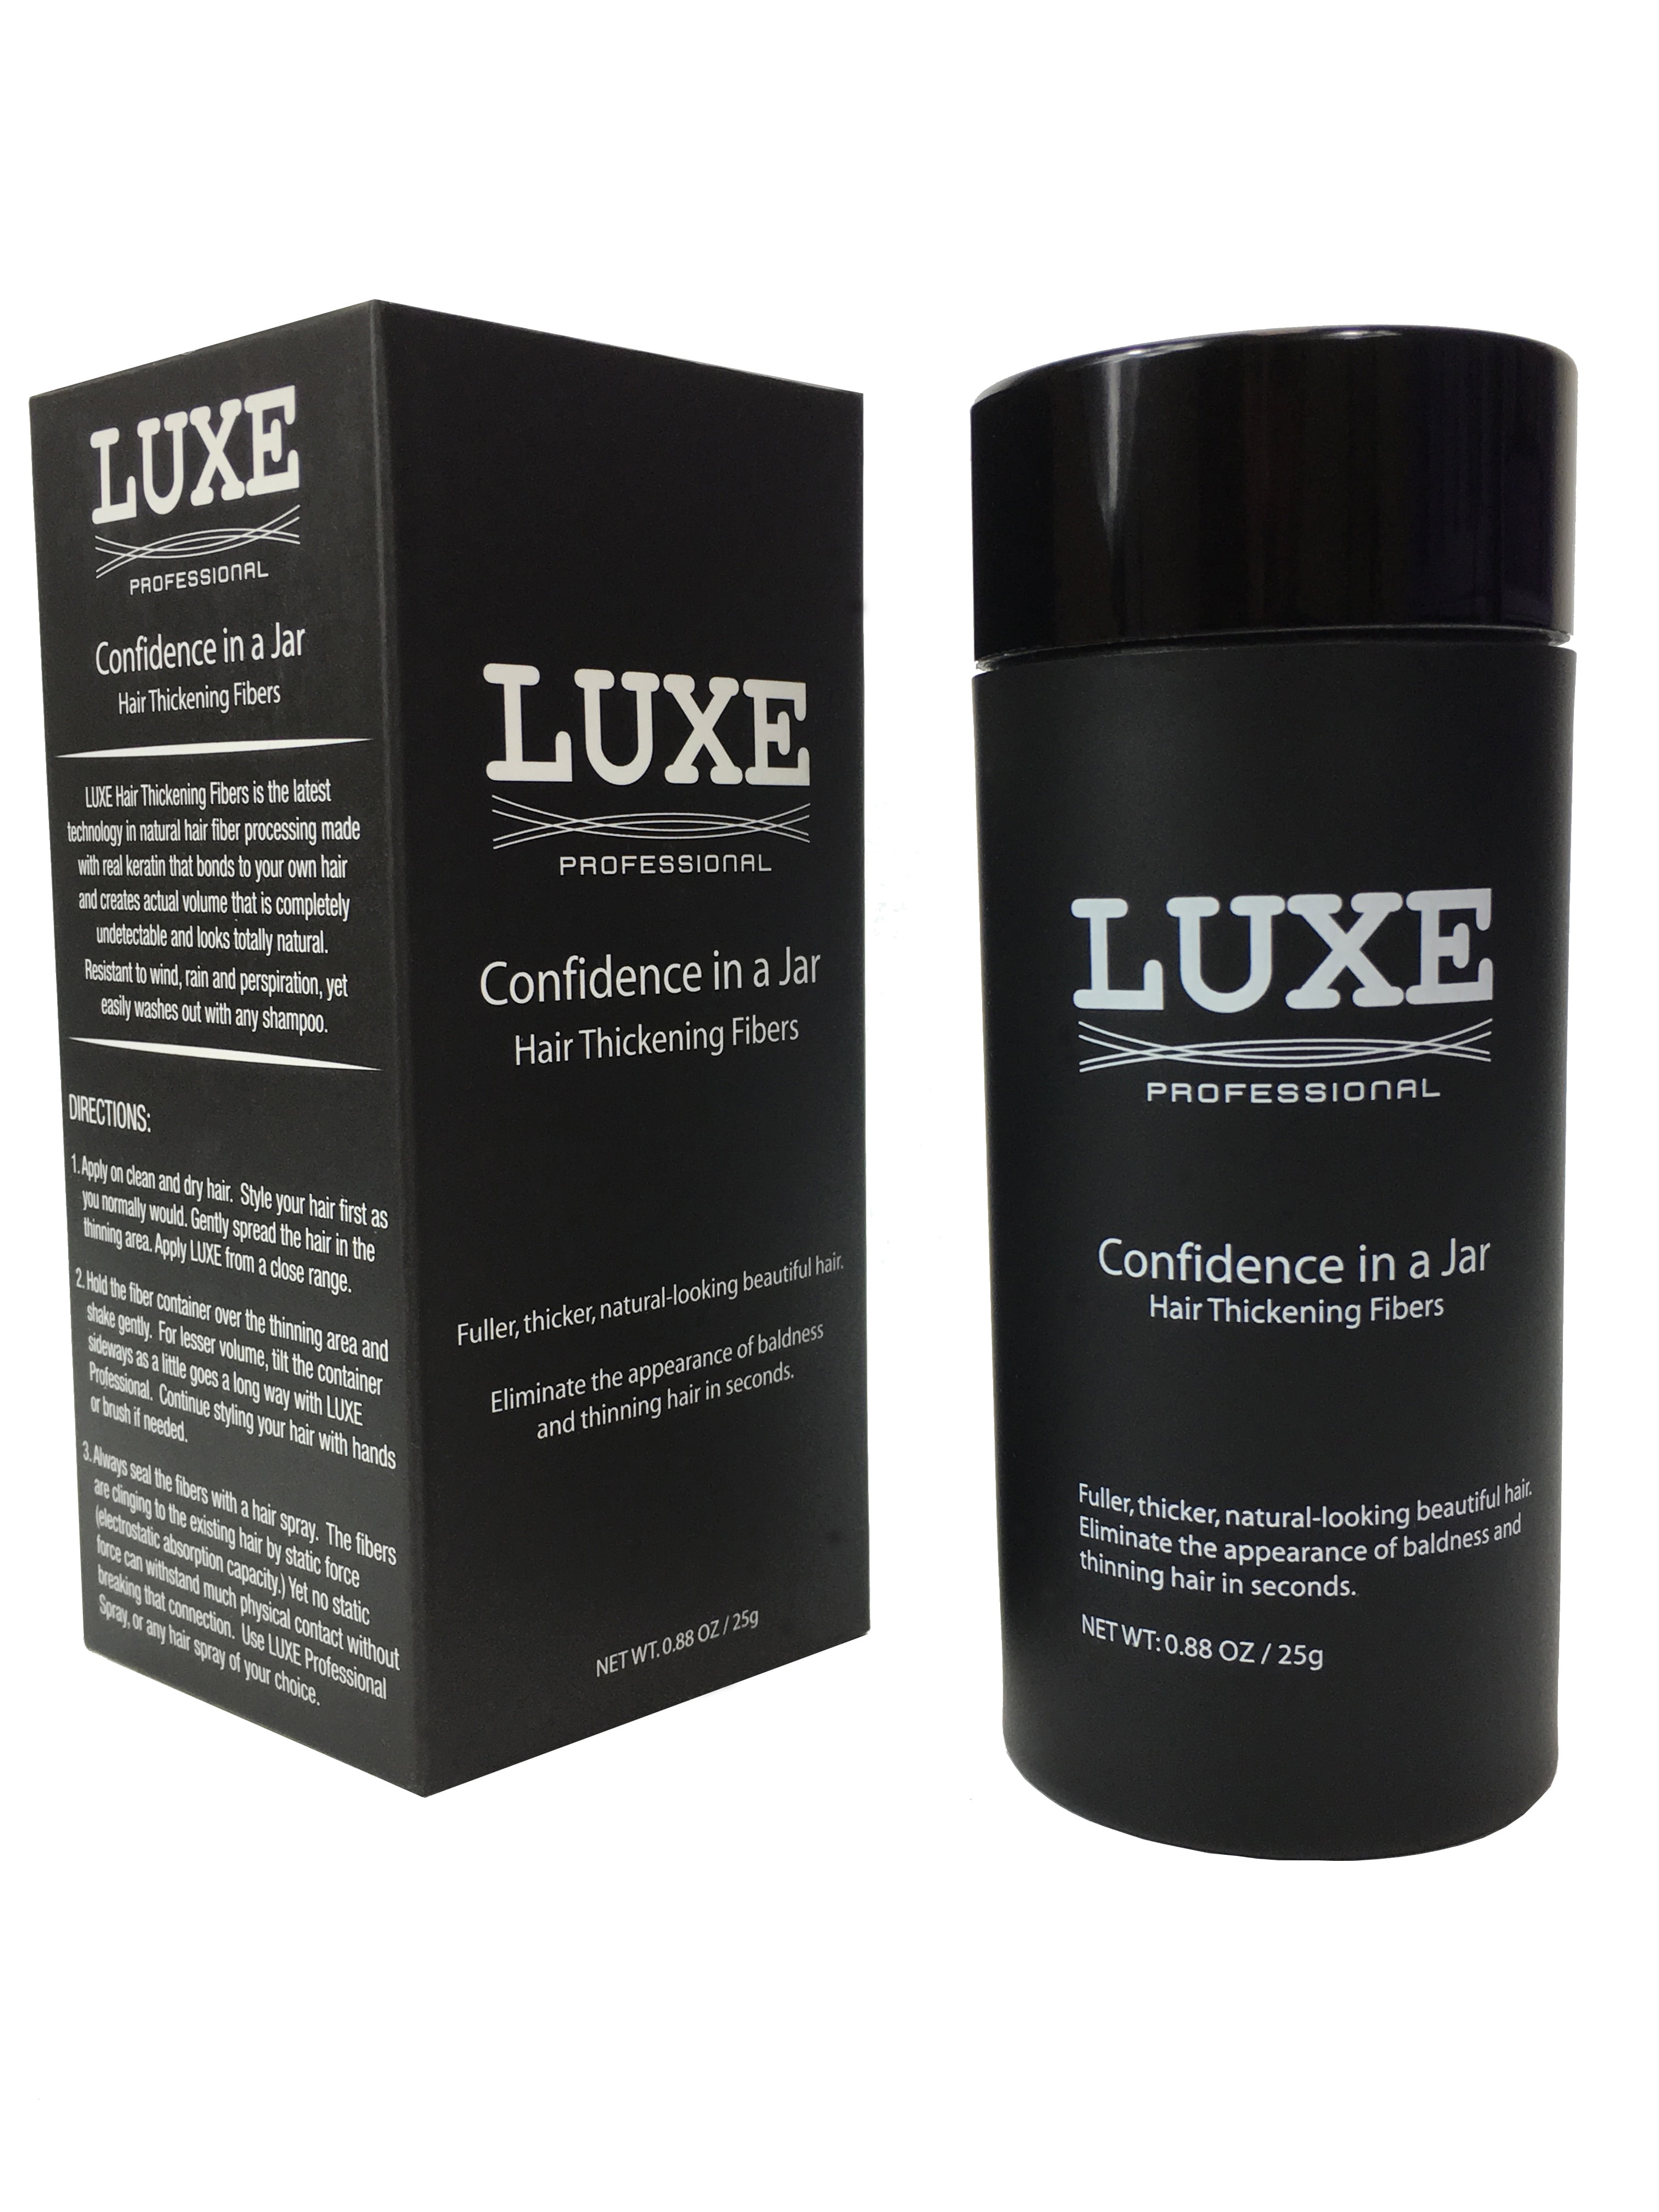 luxe hair thickening fibers with natural keratin-2 months+  supply!-confidence in a jar!-multiple colors available (black) 